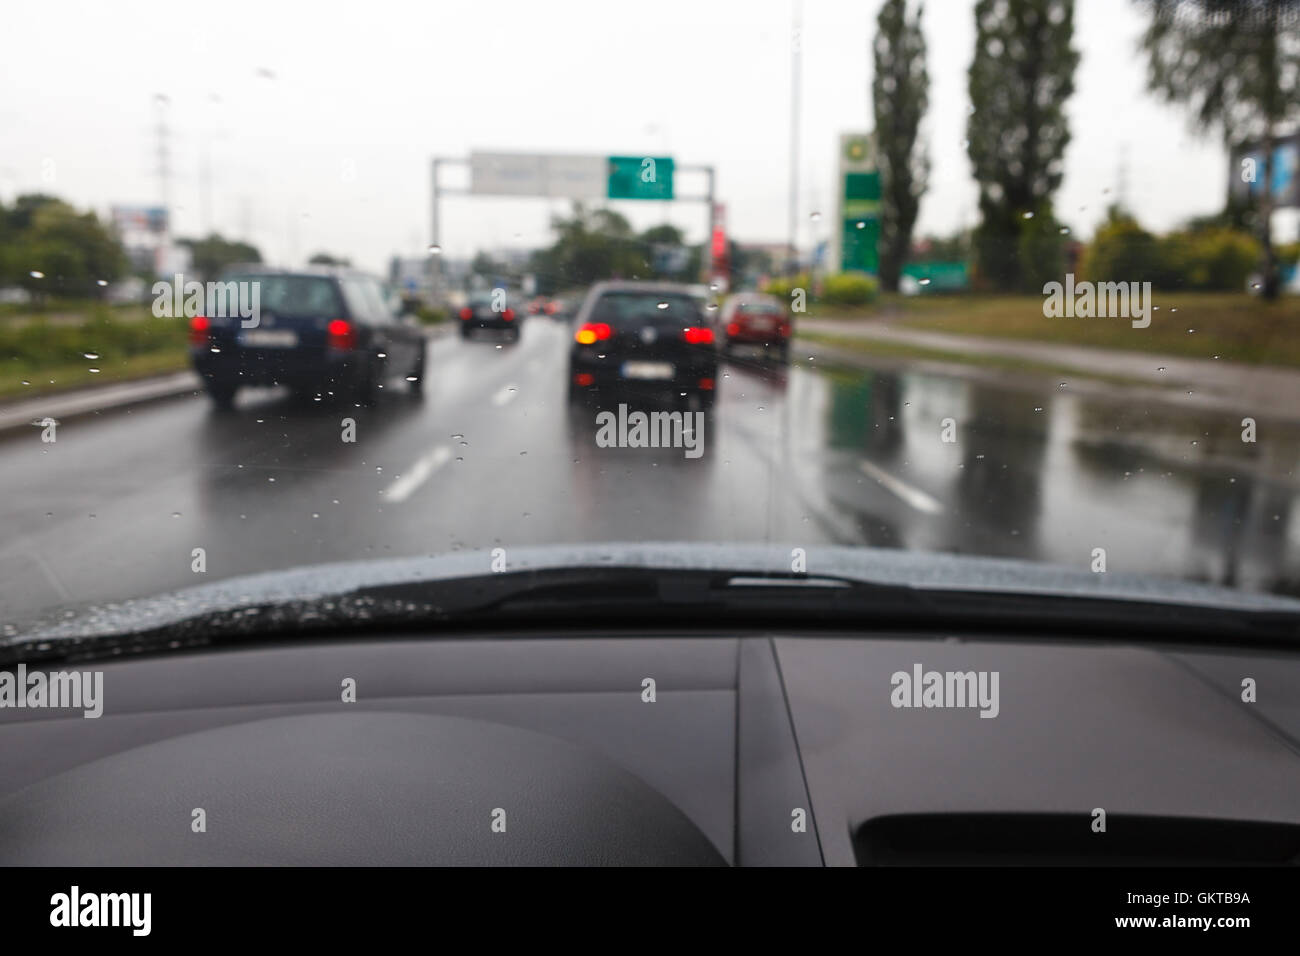 Bad weather conditions driving a car in in traffic jam - blurred view Stock Photo